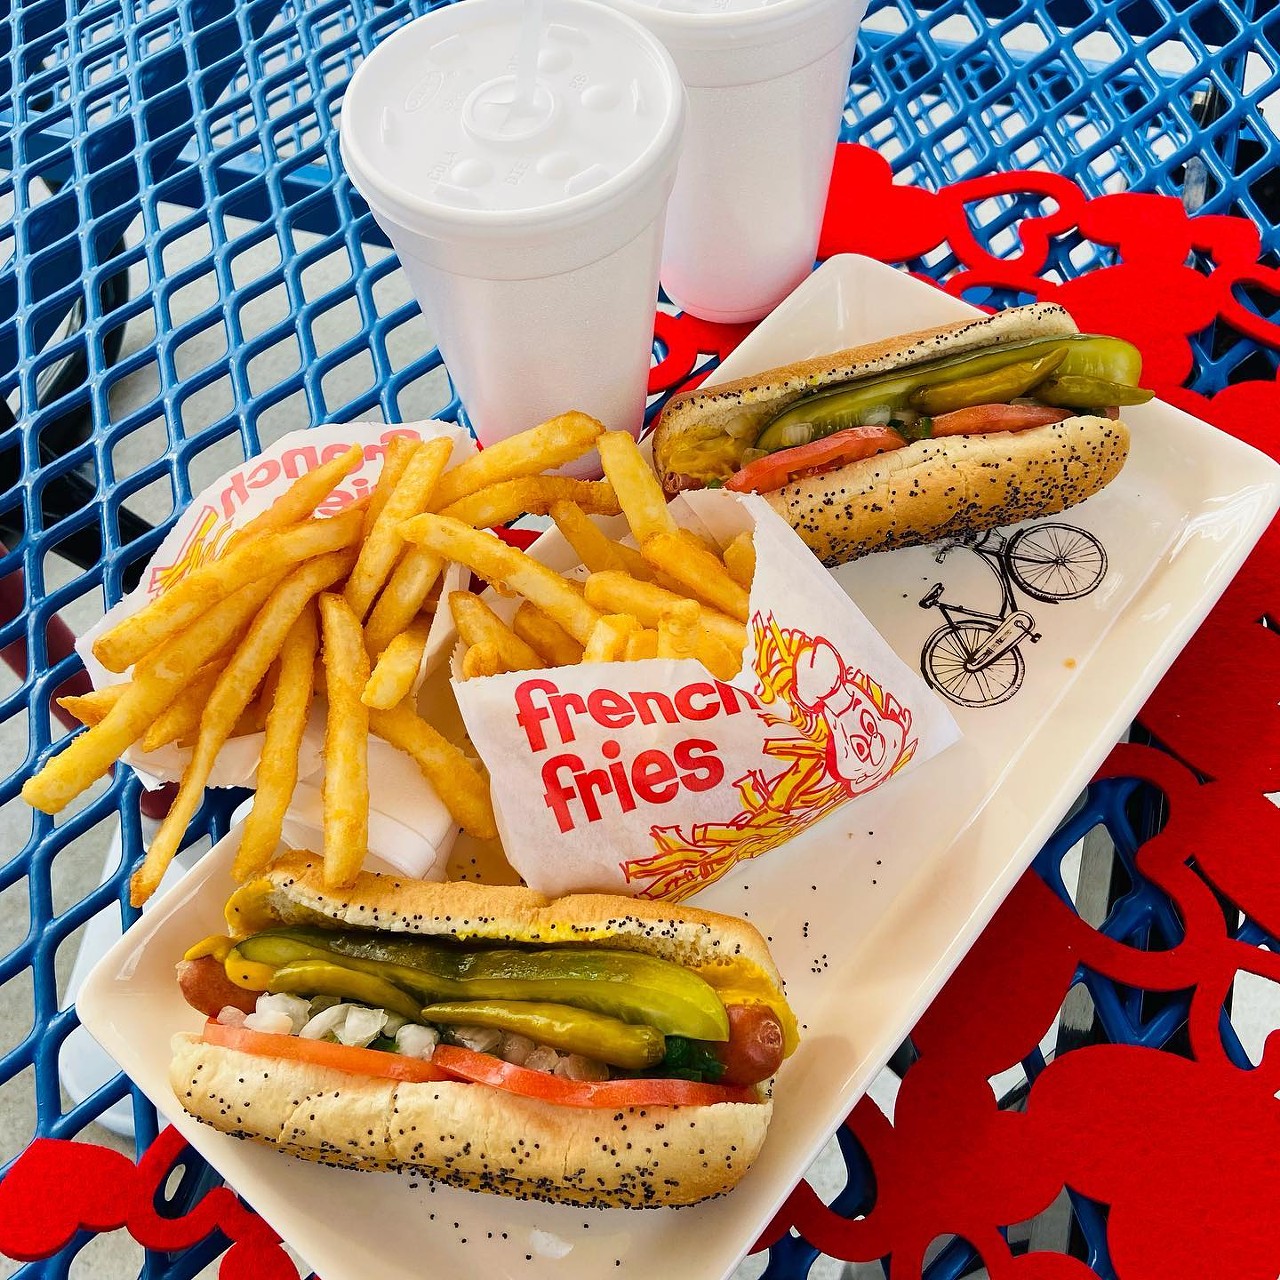 Chicago Dog & Co. 
407-335-4010, 1113 W. SR 436, Altamonte Springs 
Chicago Dog & Co. was praised for its “Chicago Poutine” with hot peppers.
